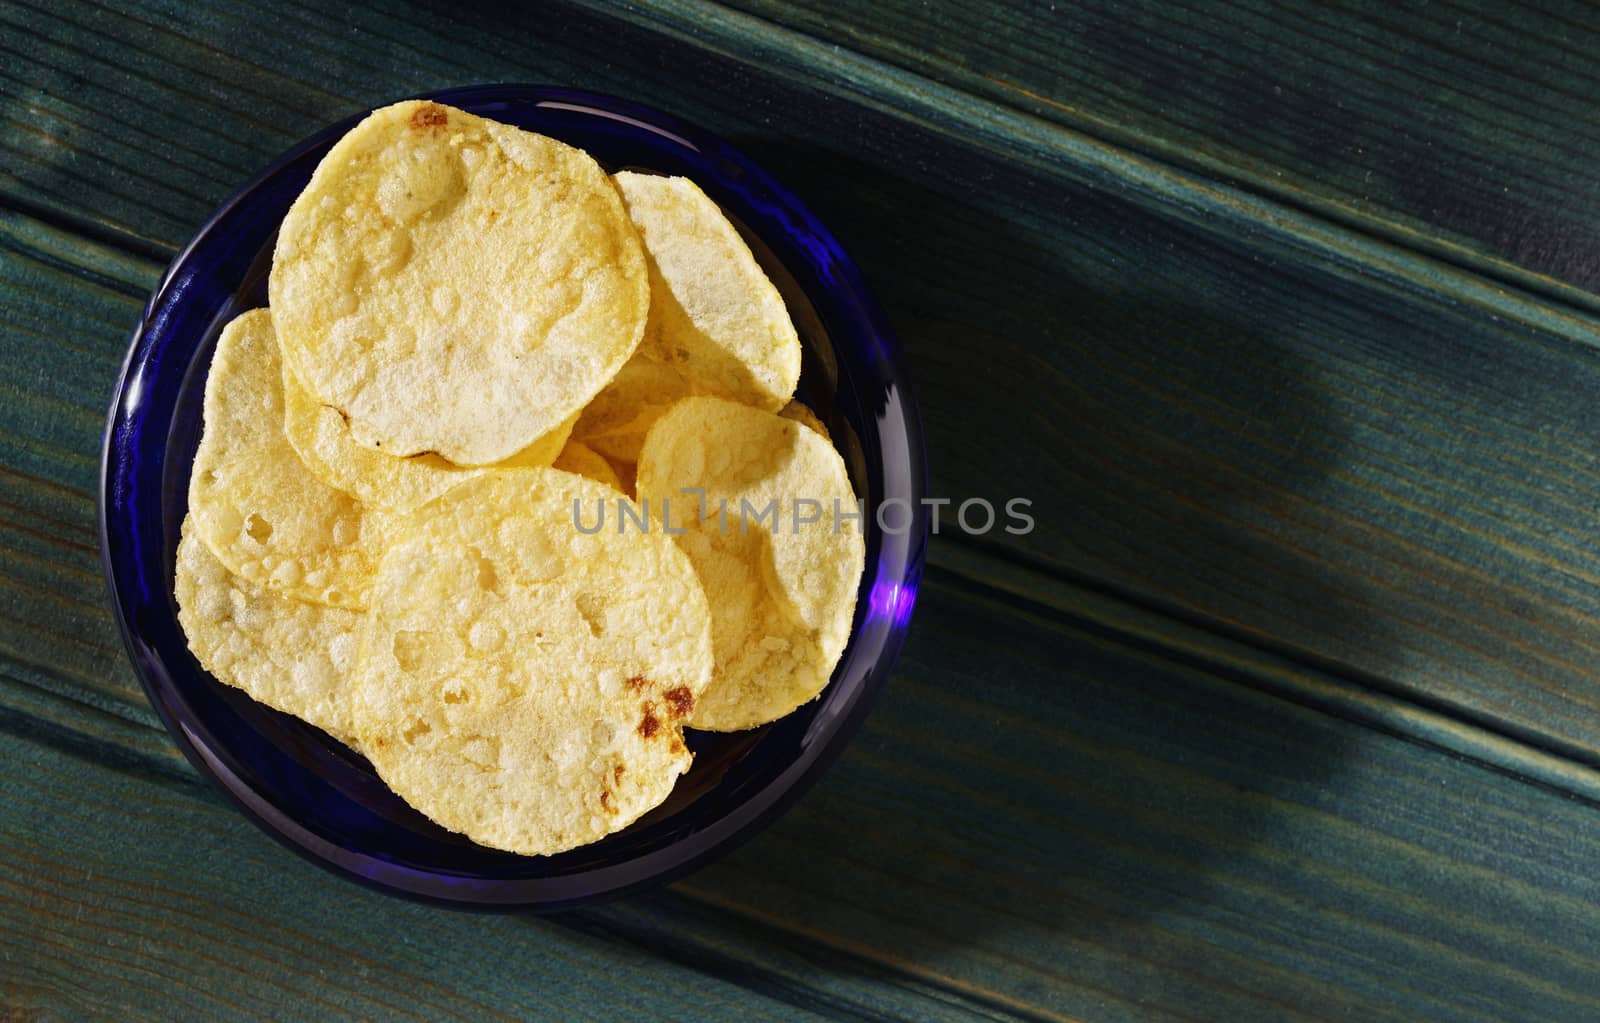 Potato chips or crisps ina blue bowl on dark wooden table,beautiful slices of fried potatoes